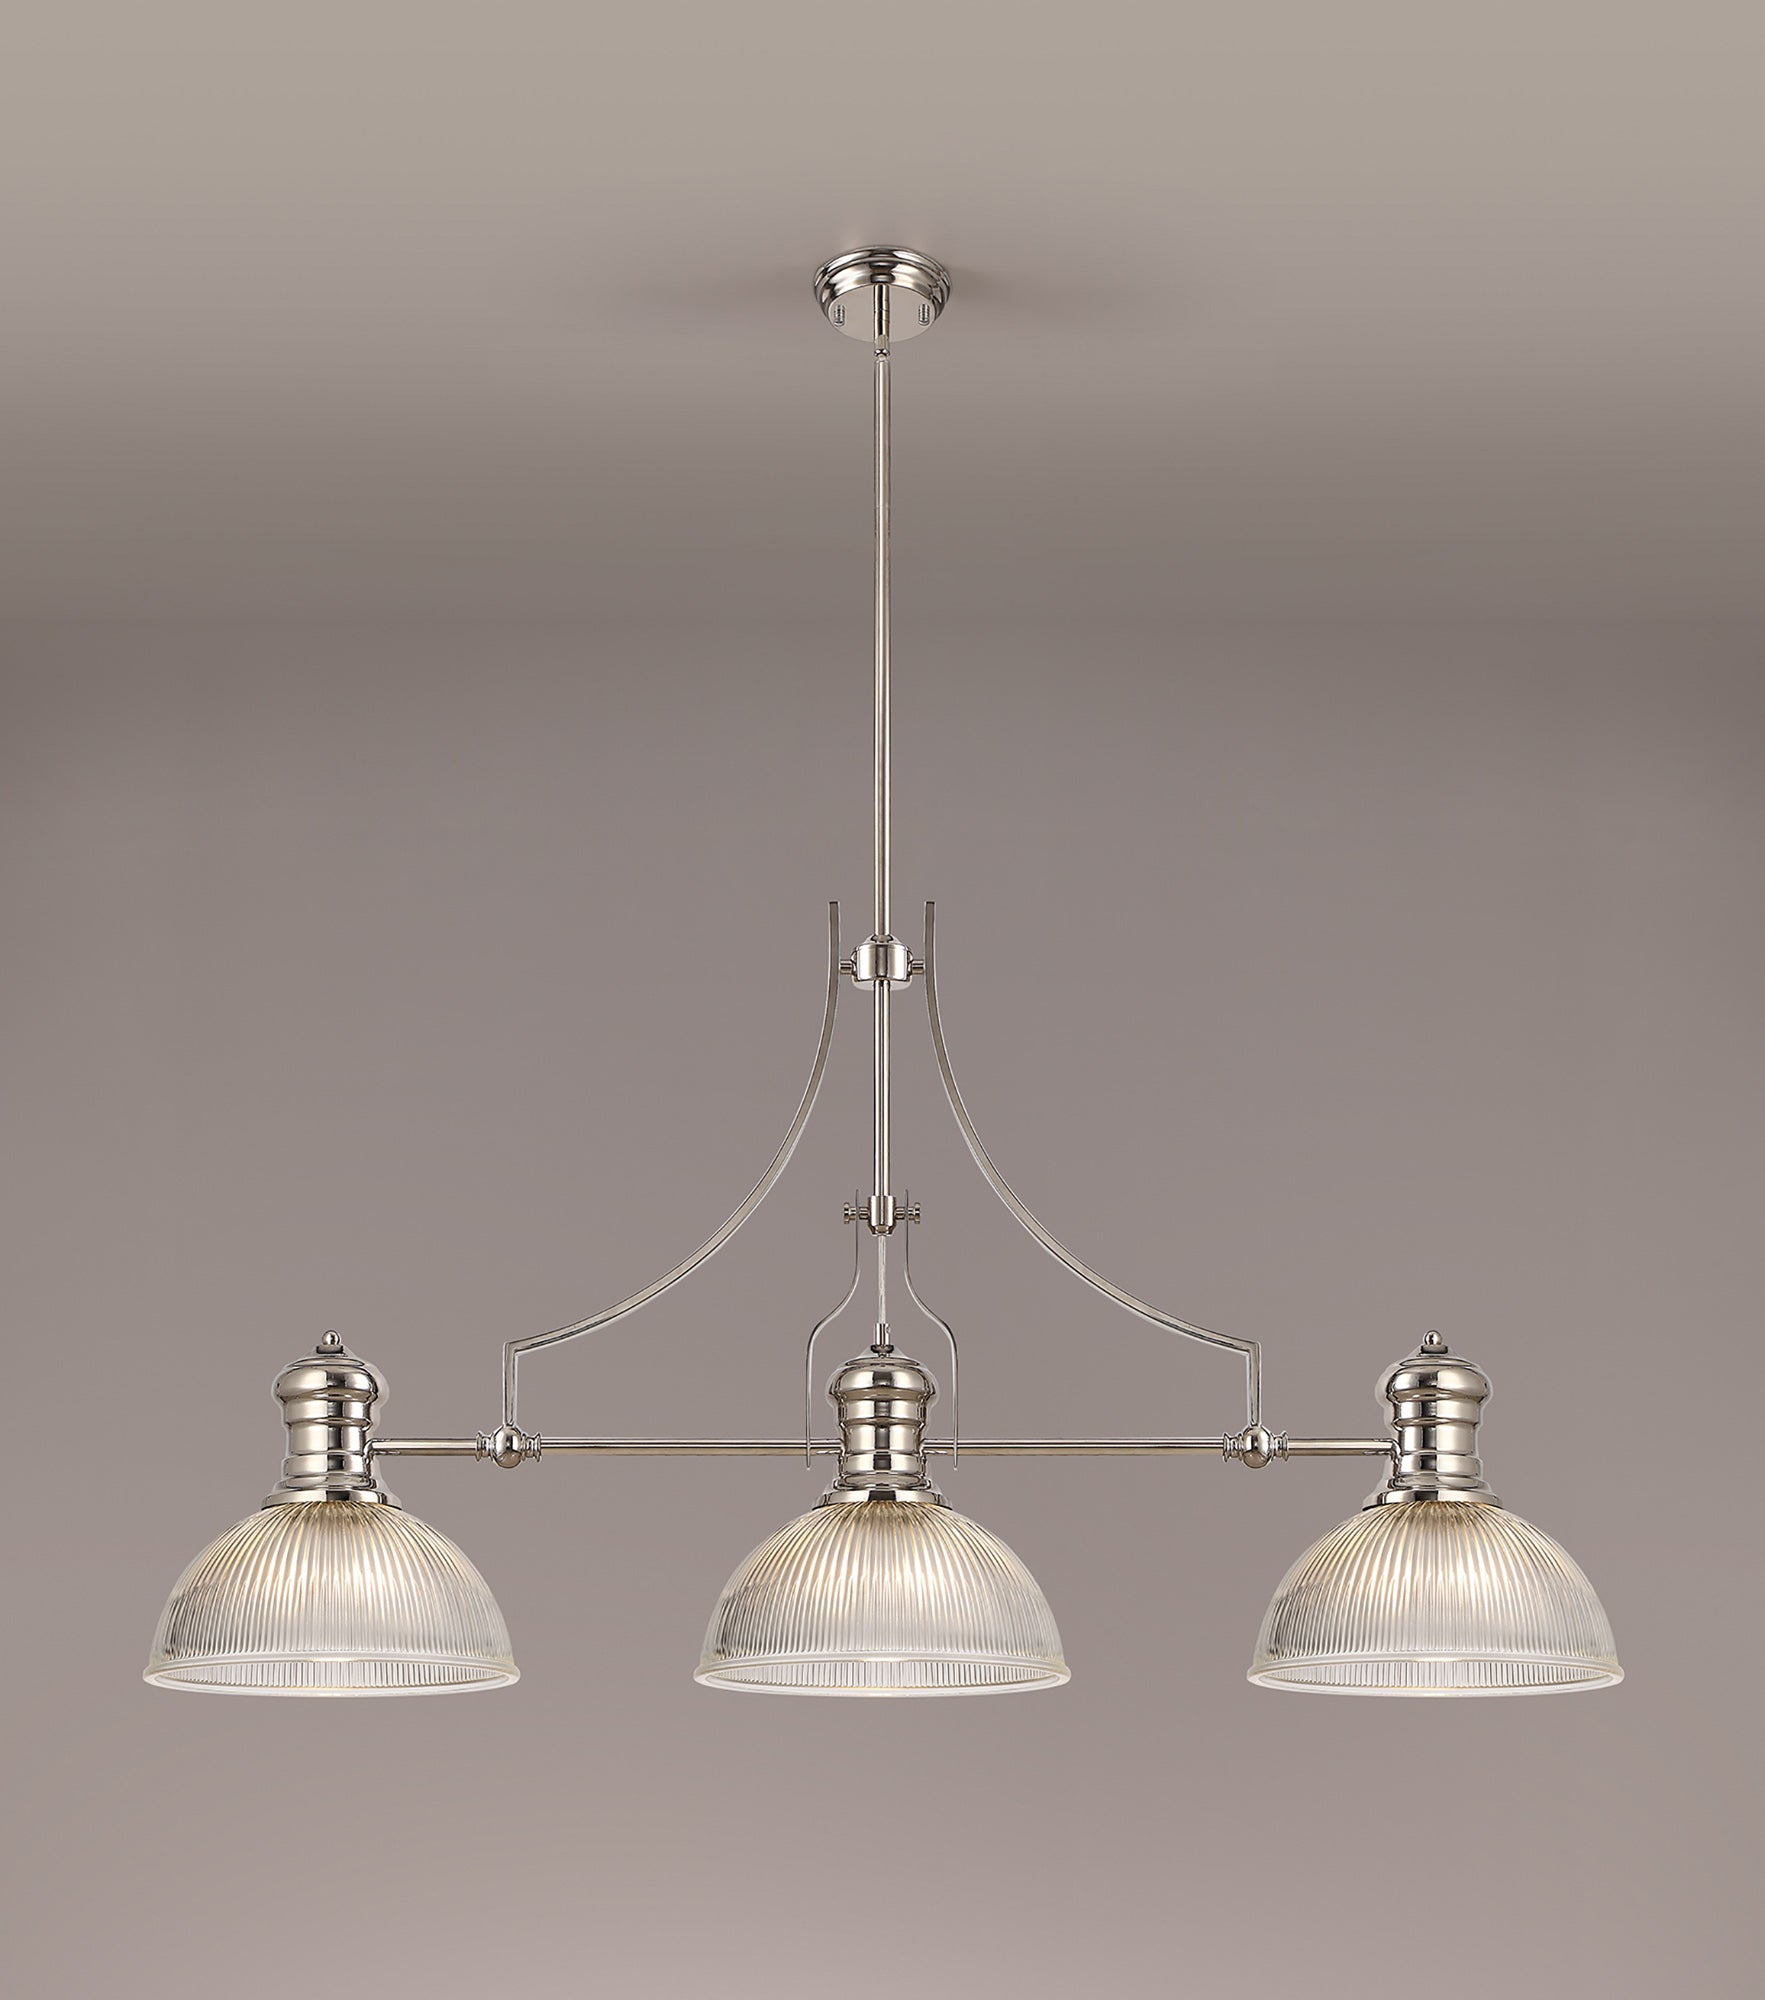 Docker 3 Light Linear Pendant E27 With 30cm Dome Glass Shade, Polished Nickel, Clear